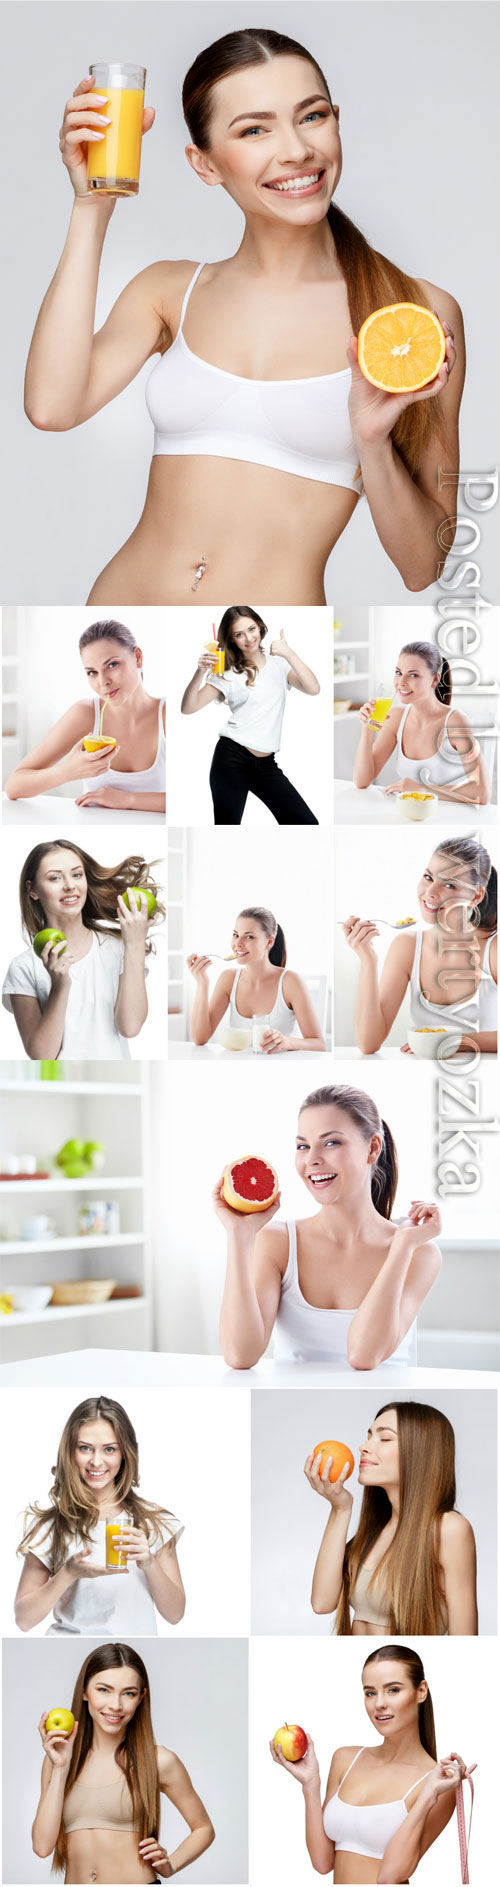 Healthy food, girls with fruits stock photo